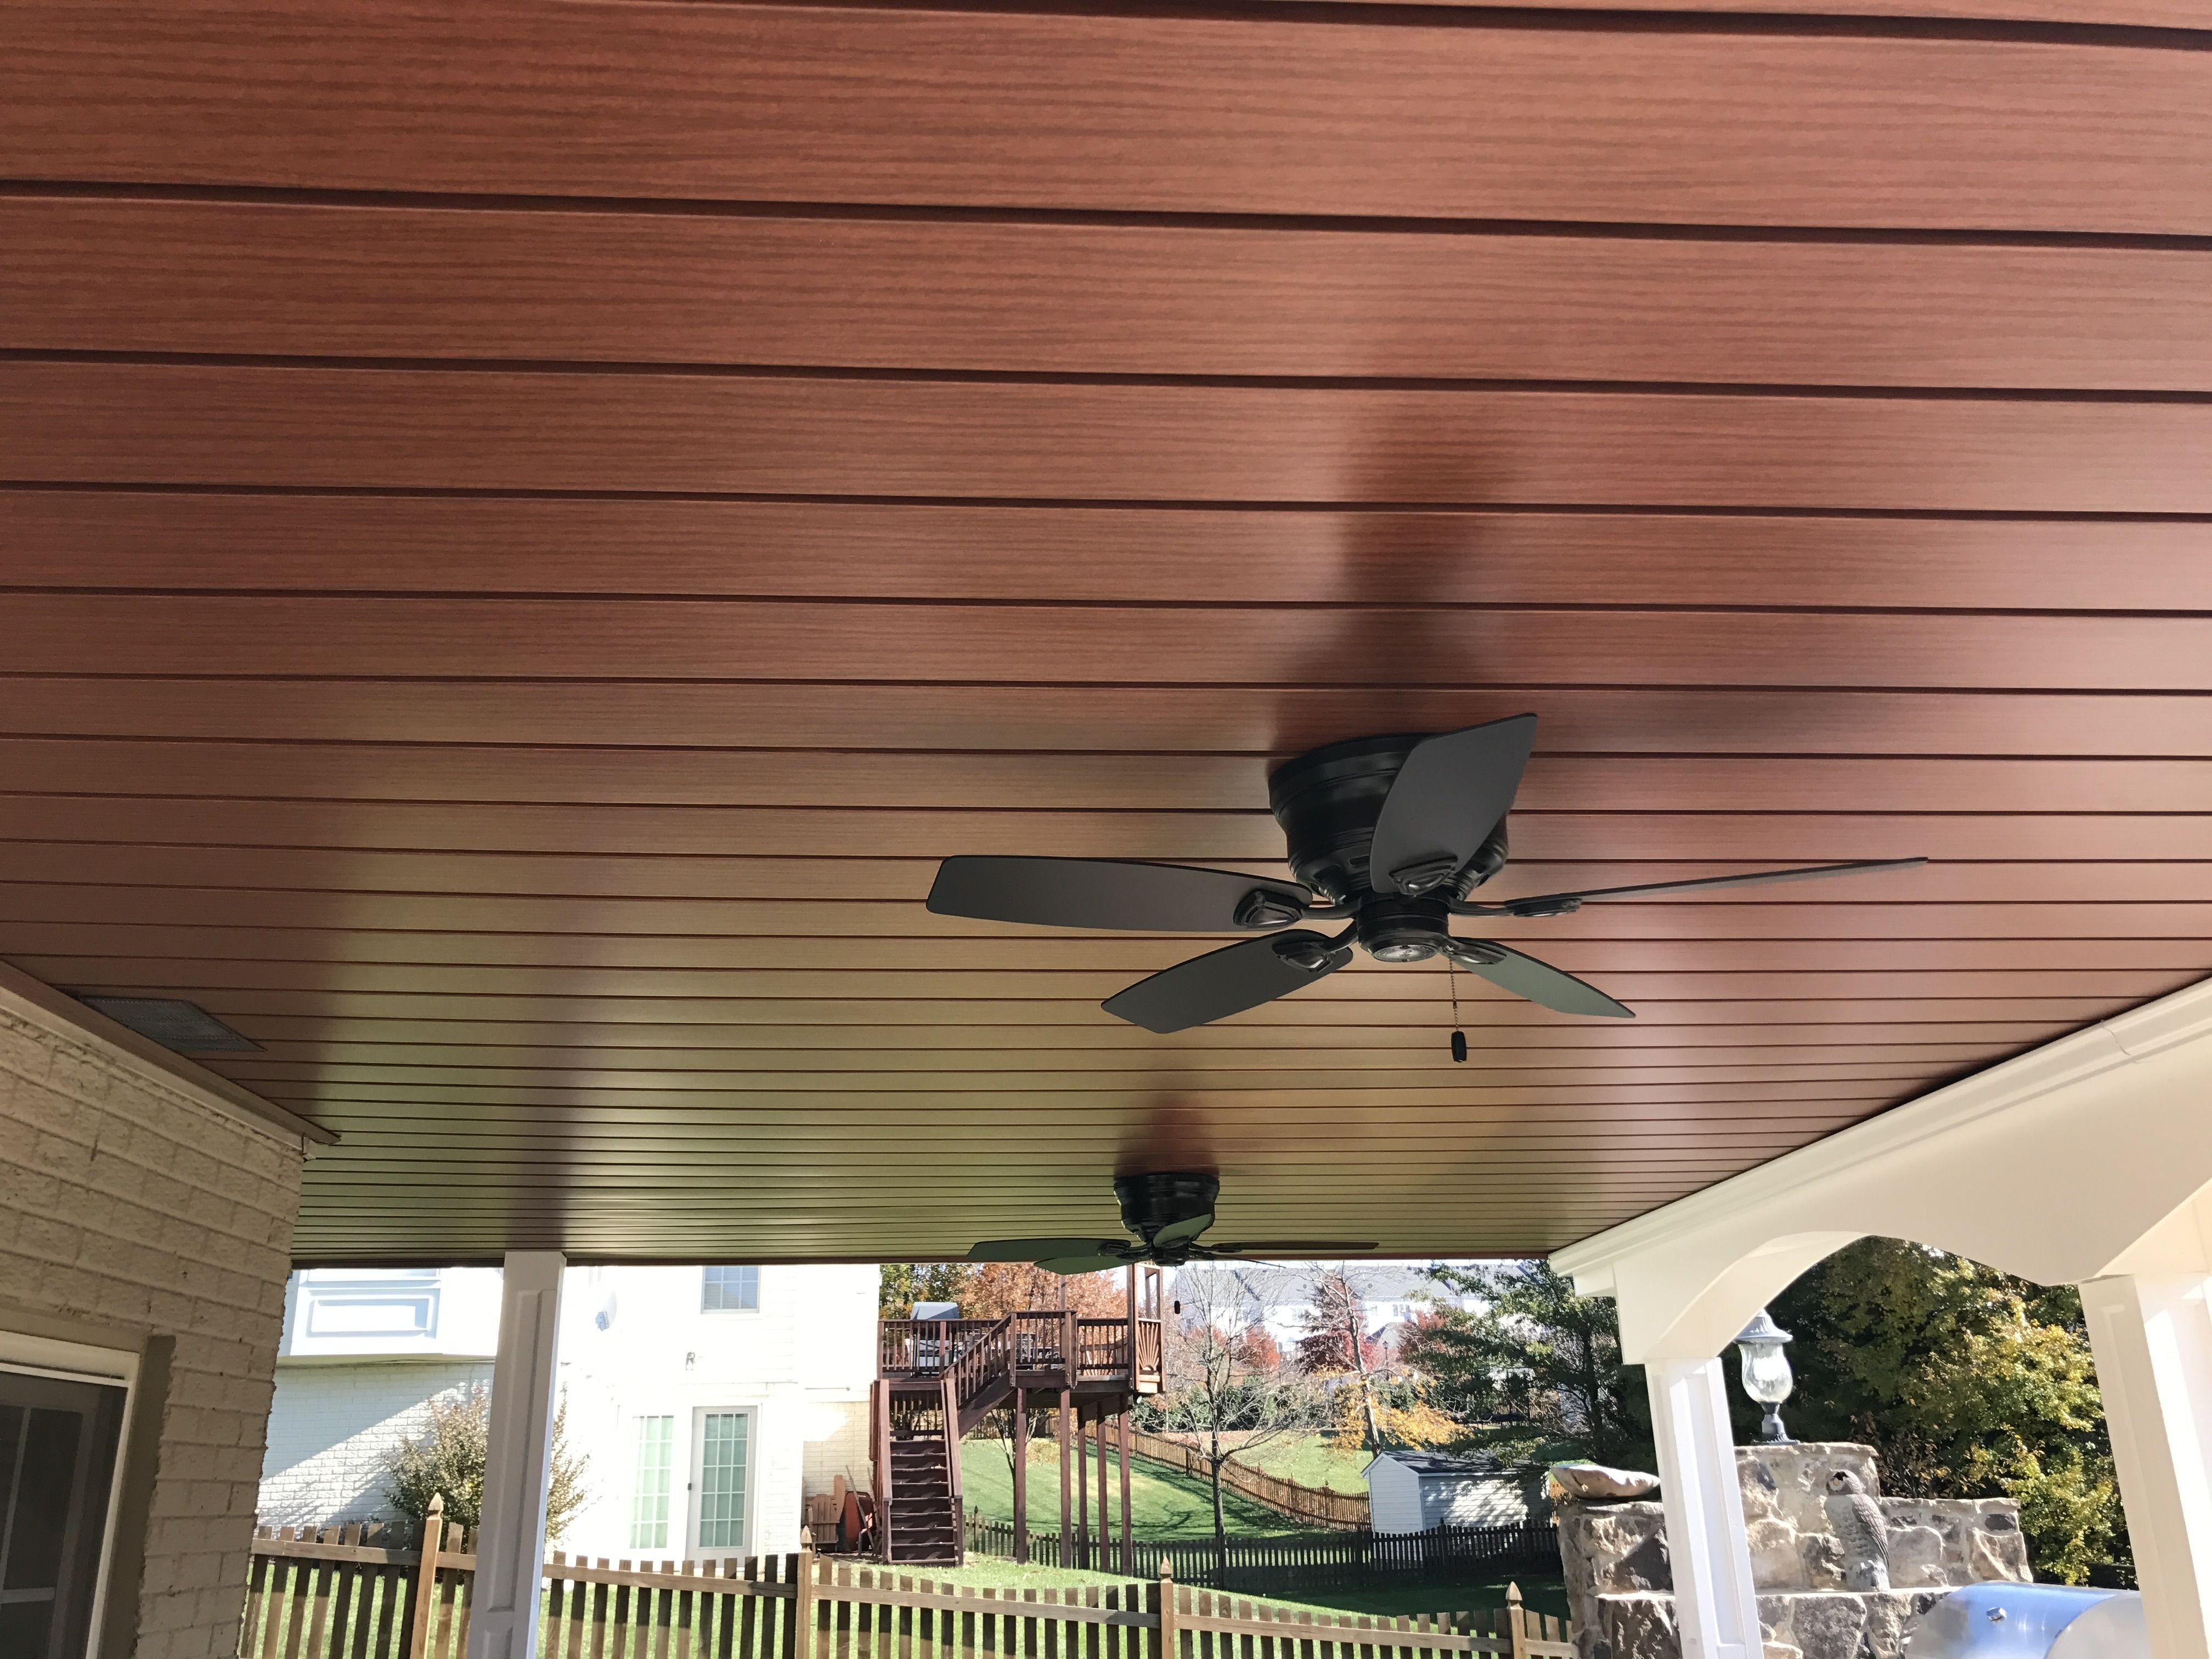 Well Known Outdoor Ceiling Fan Under Deck Intended For Under Deck Roof Home Design Ideas And Pictures, Under Deck Ceiling (View 4 of 20)